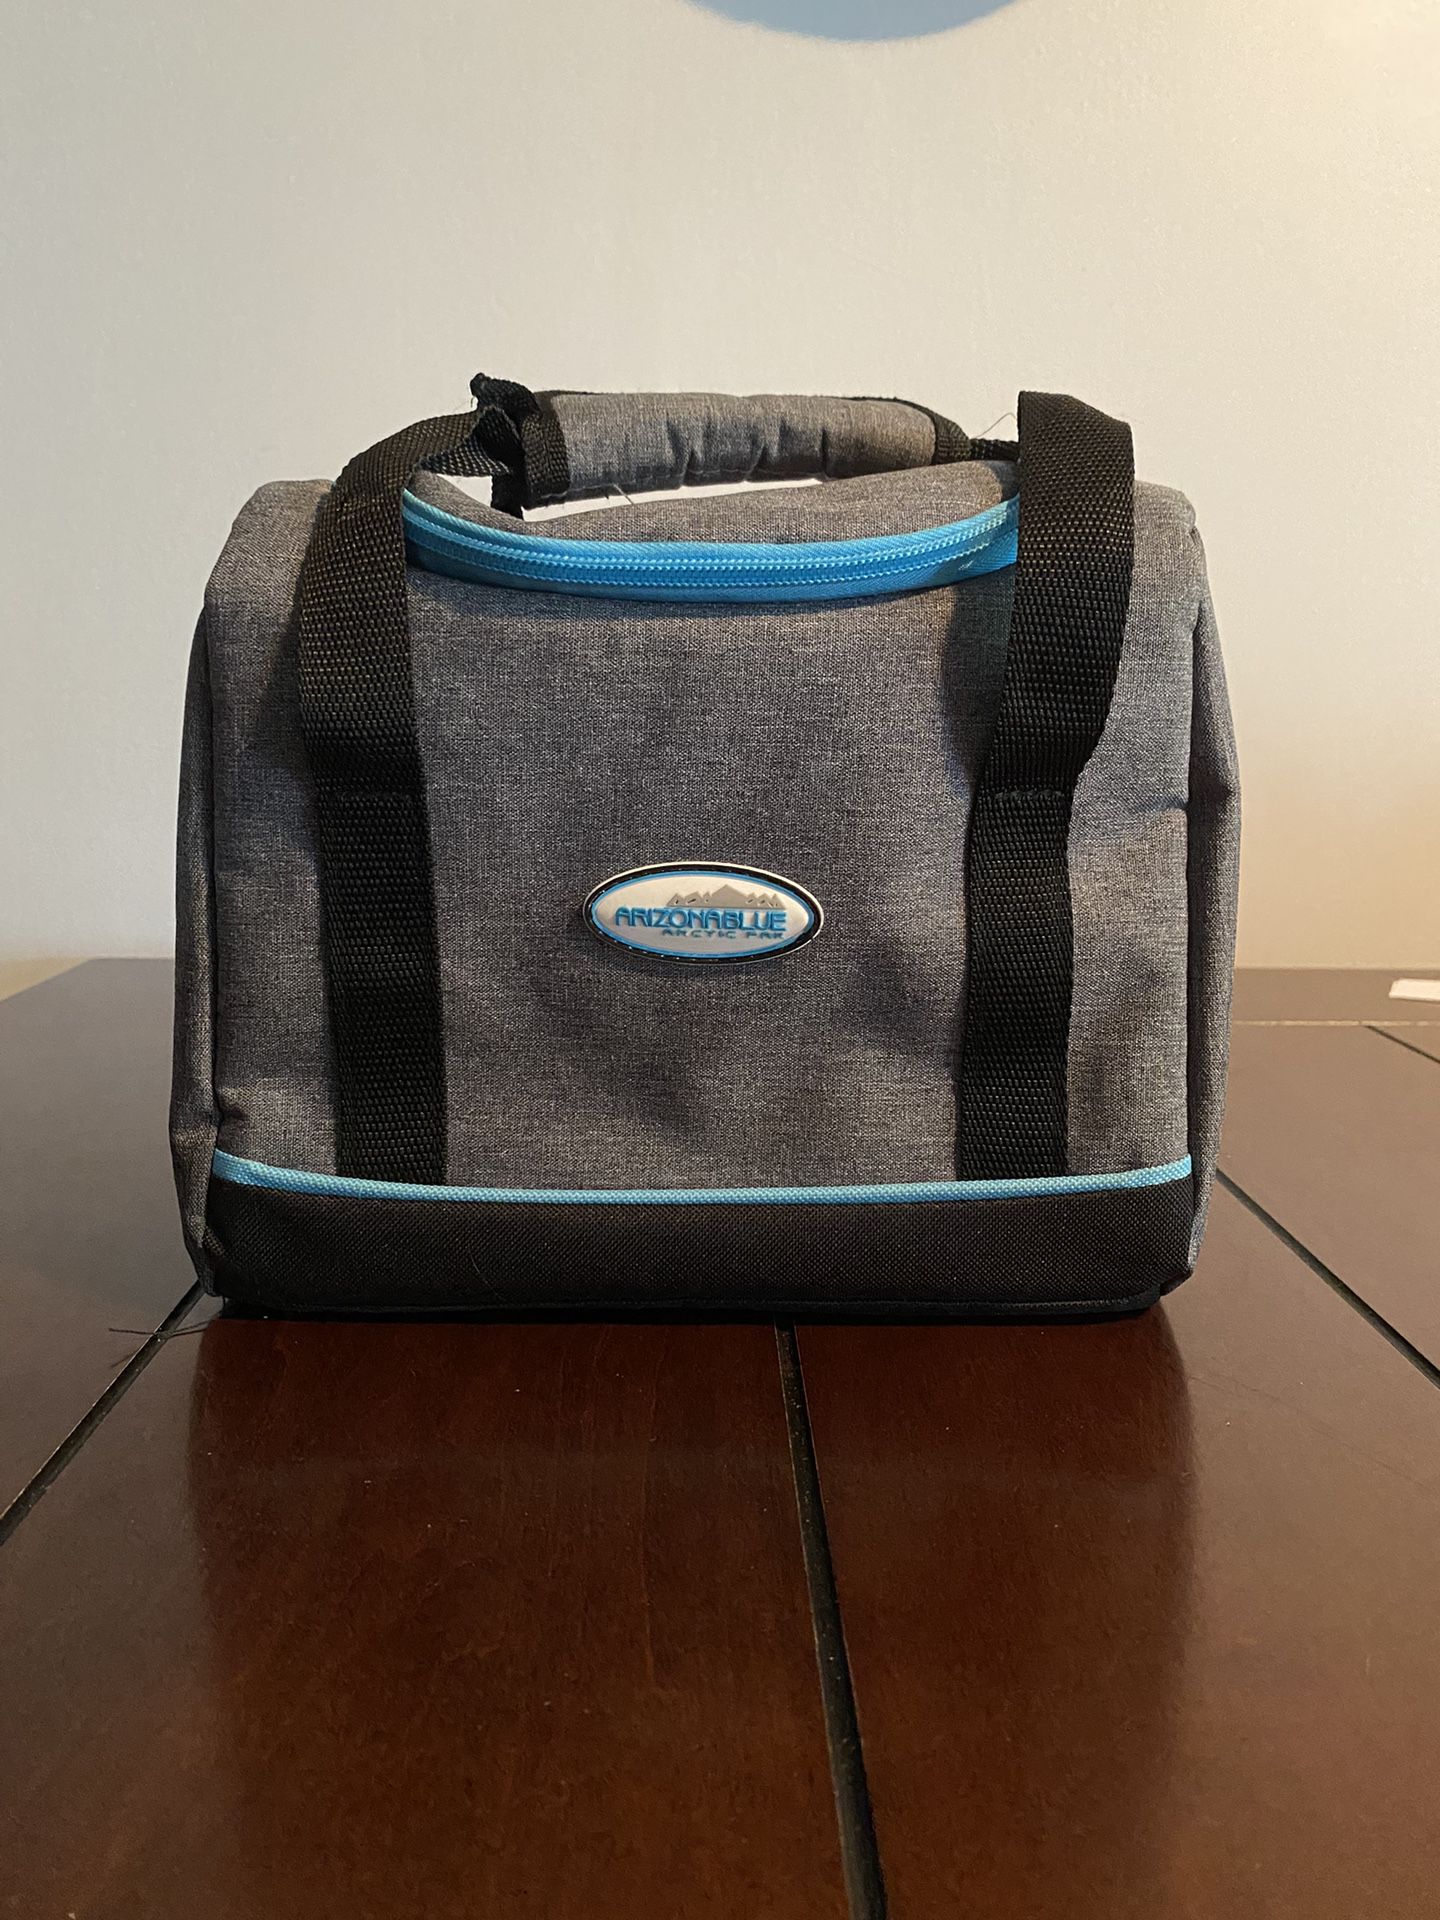 Insulated Lunch Bag 